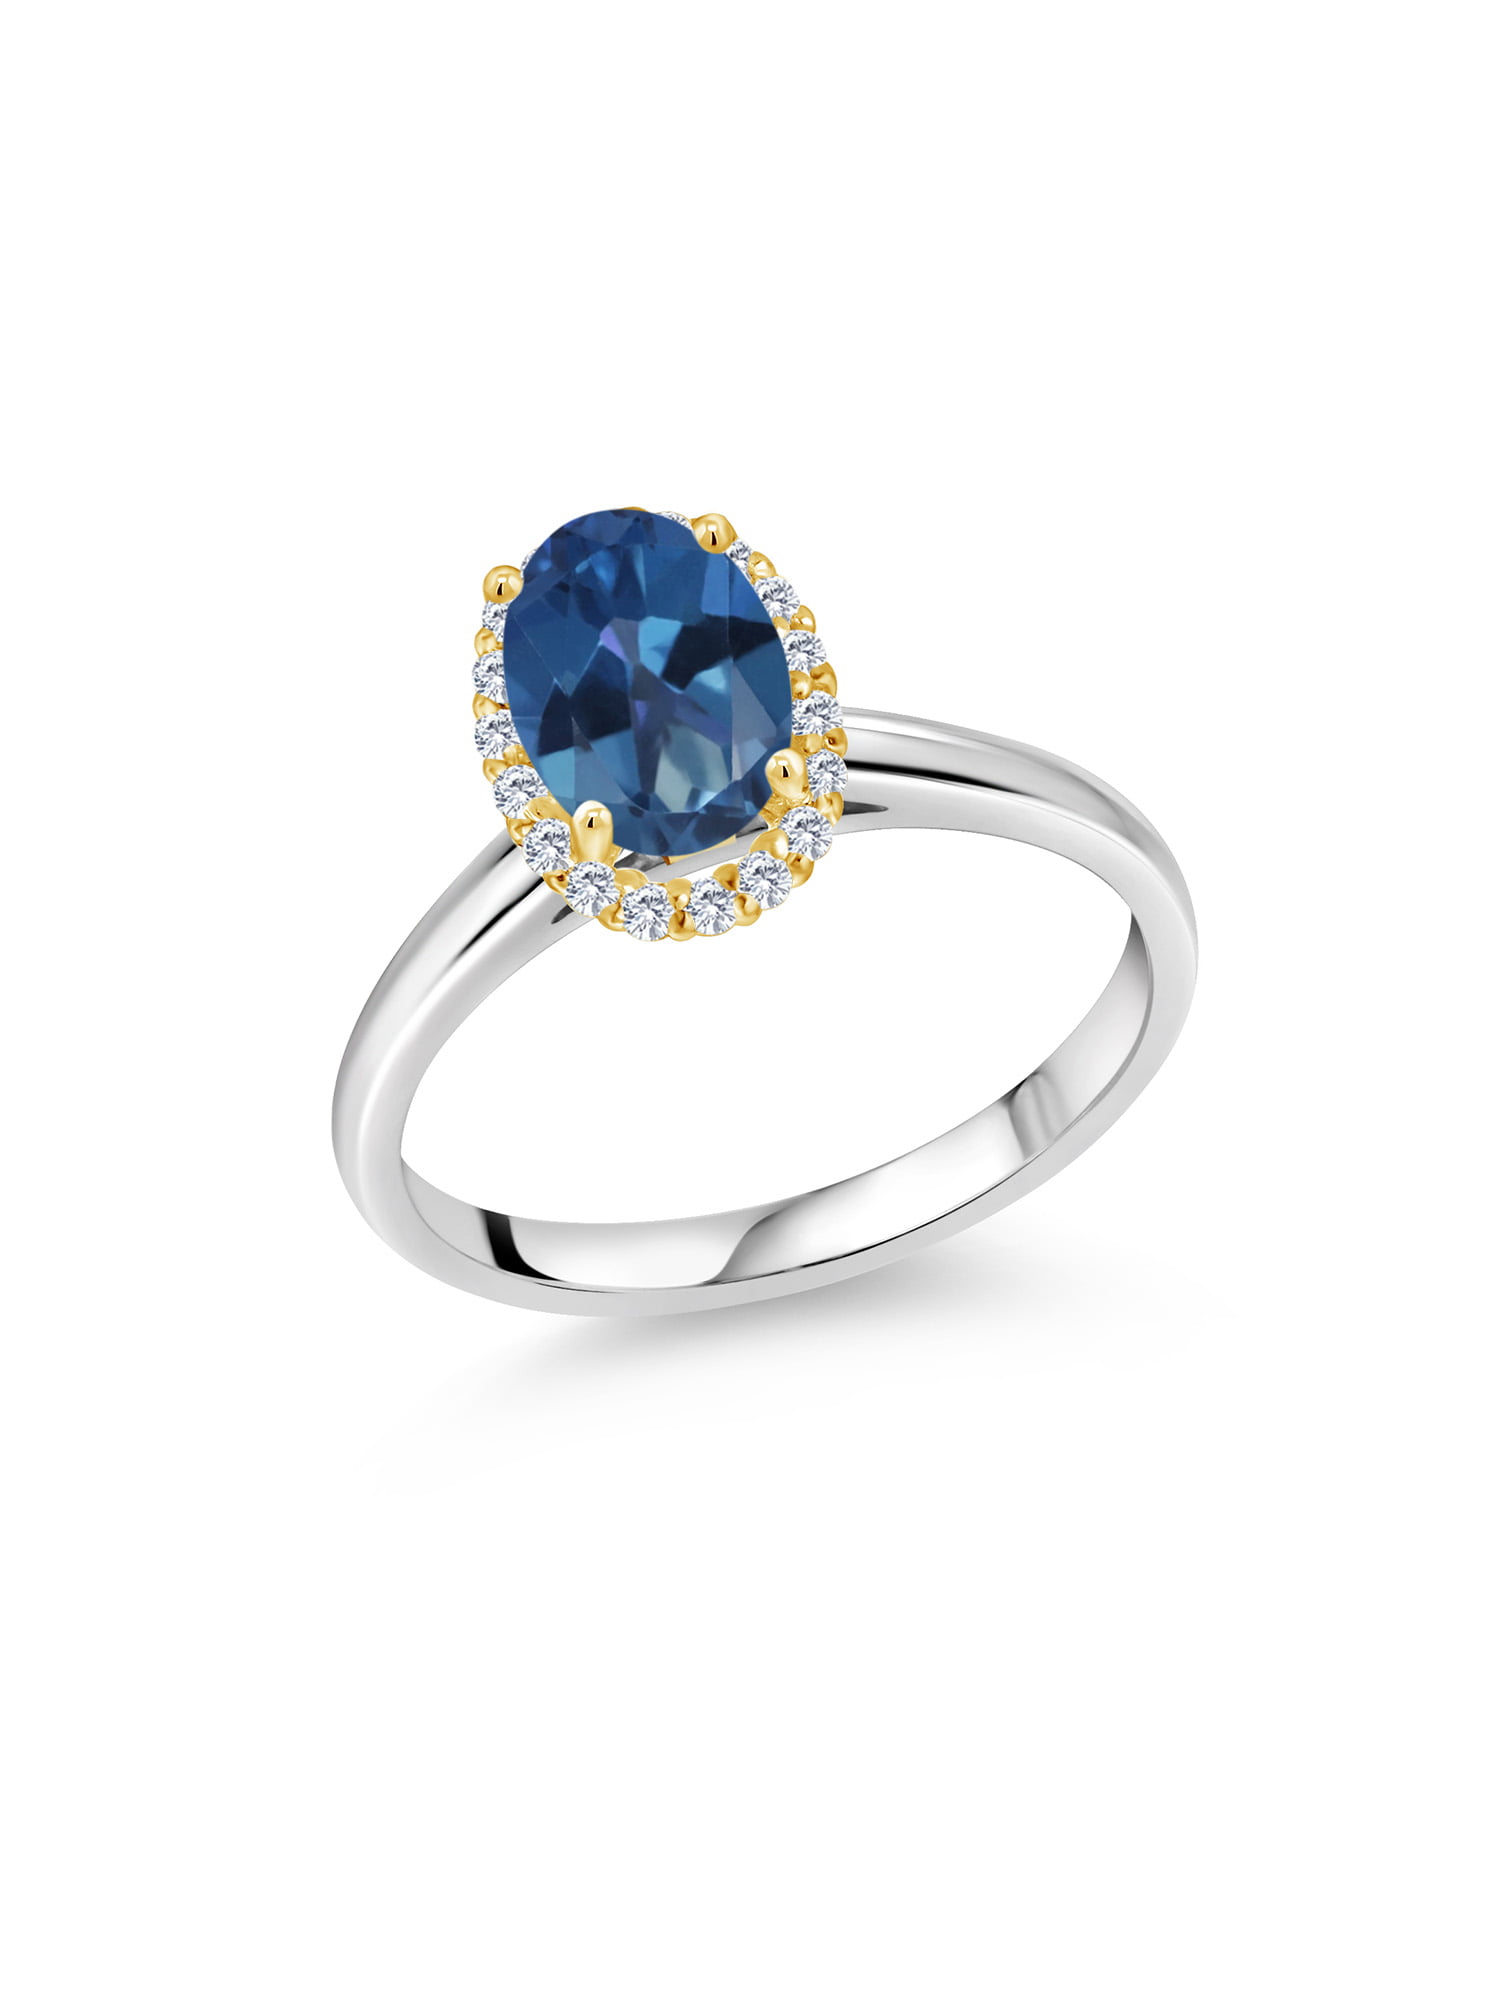 2.64 Ct Oval Blue Sapphire 925 Sterling Silver Ring 